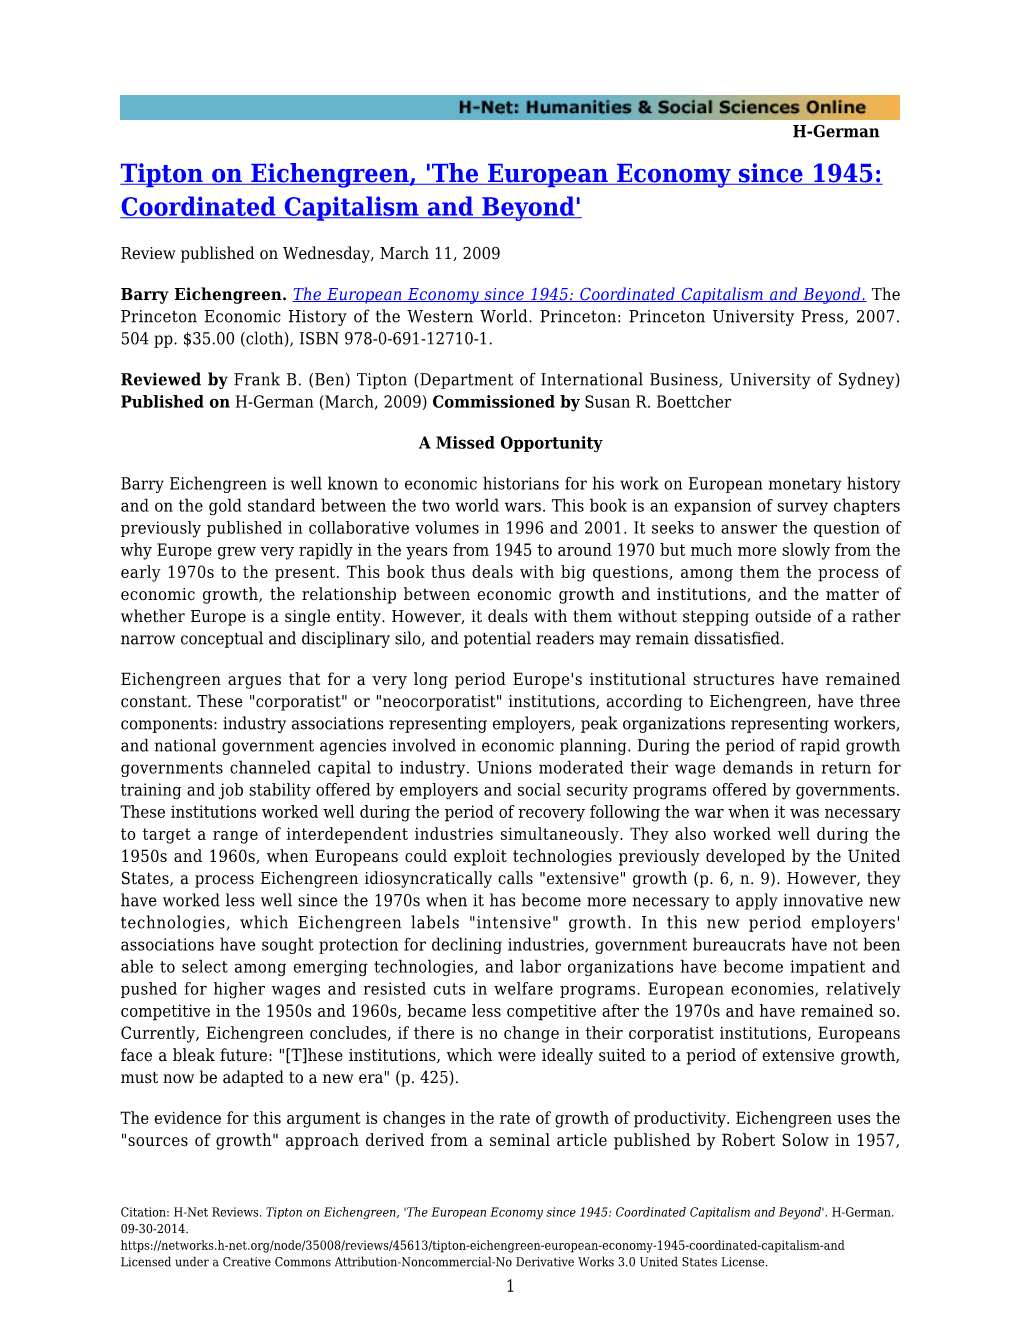 Tipton on Eichengreen, 'The European Economy Since 1945: Coordinated Capitalism and Beyond'